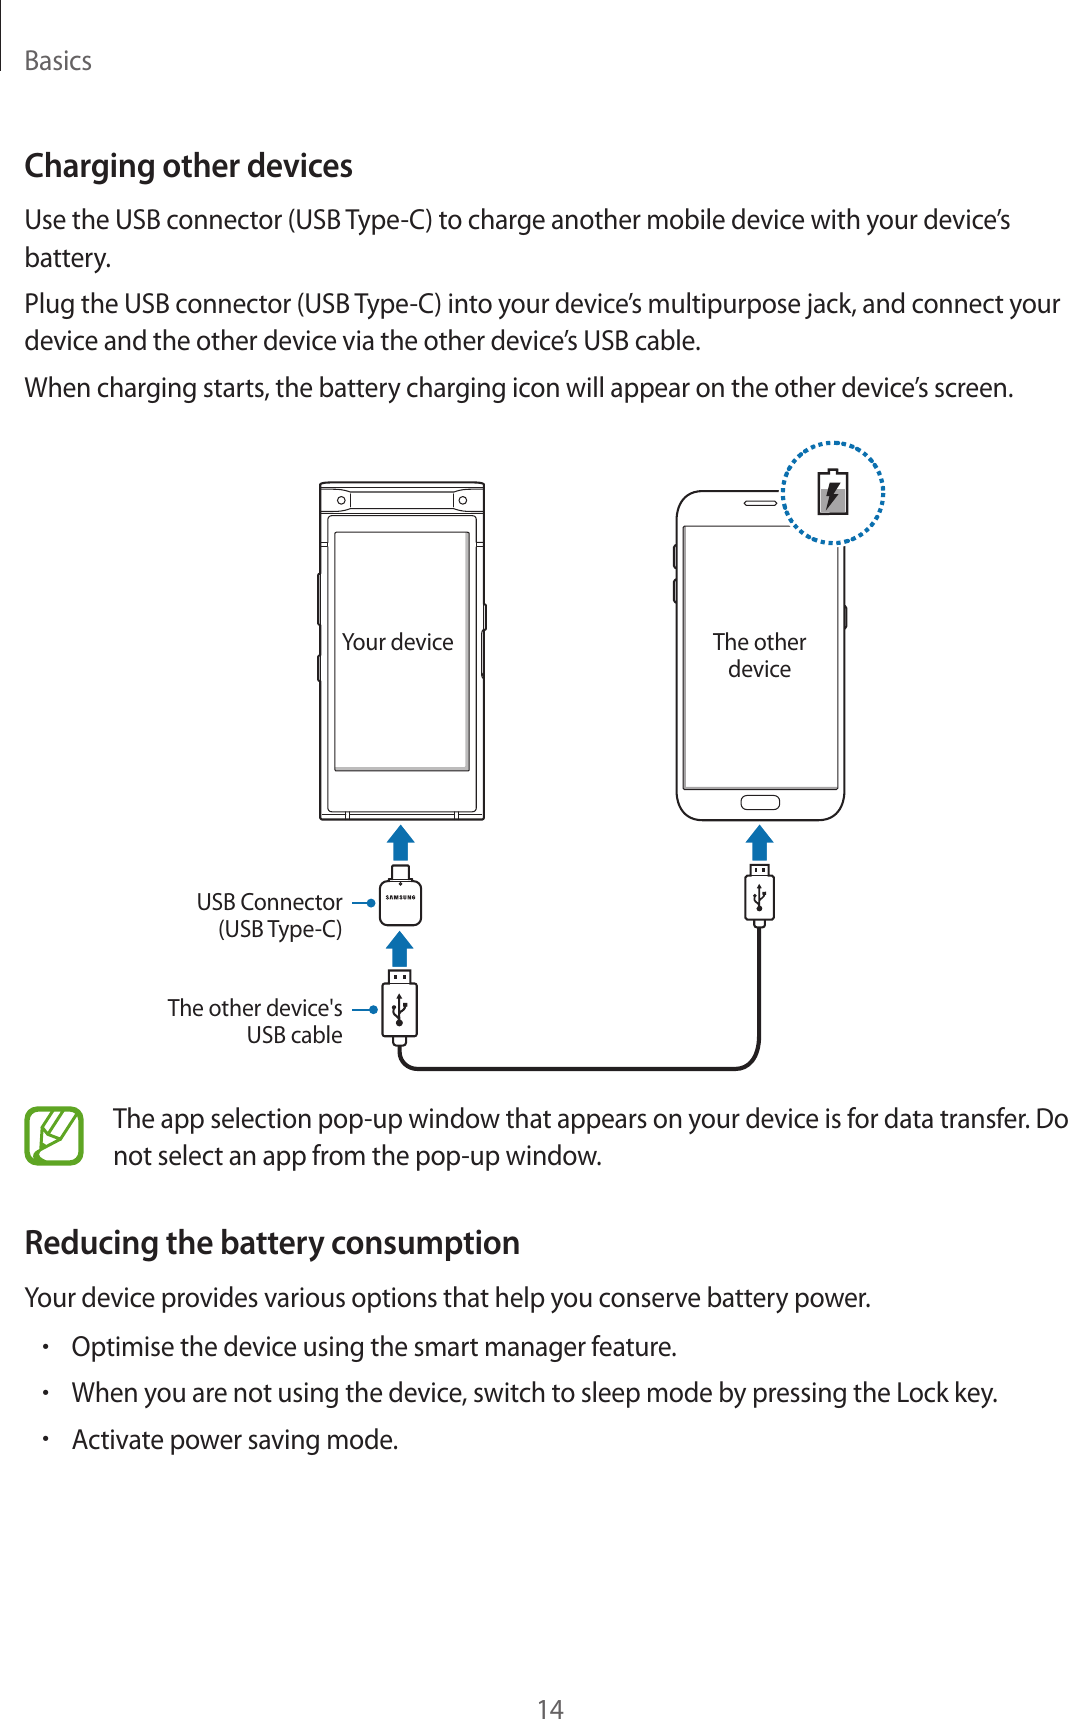 Basics14Charging other devicesUse the USB connector (USB Type-C) to charge another mobile device with your device’s battery.Plug the USB connector (USB Type-C) into your device’s multipurpose jack, and connect your device and the other device via the other device’s USB cable.When charging starts, the battery charging icon will appear on the other device’s screen.Your device The other deviceUSB Connector (USB Type-C)The other device&apos;s USB cableThe app selection pop-up window that appears on your device is for data transfer. Do not select an app from the pop-up window.Reducing the battery consumptionYour device provides various options that help you conserve battery power.•Optimise the device using the smart manager feature.•When you are not using the device, switch to sleep mode by pressing the Lock key.•Activate power saving mode.